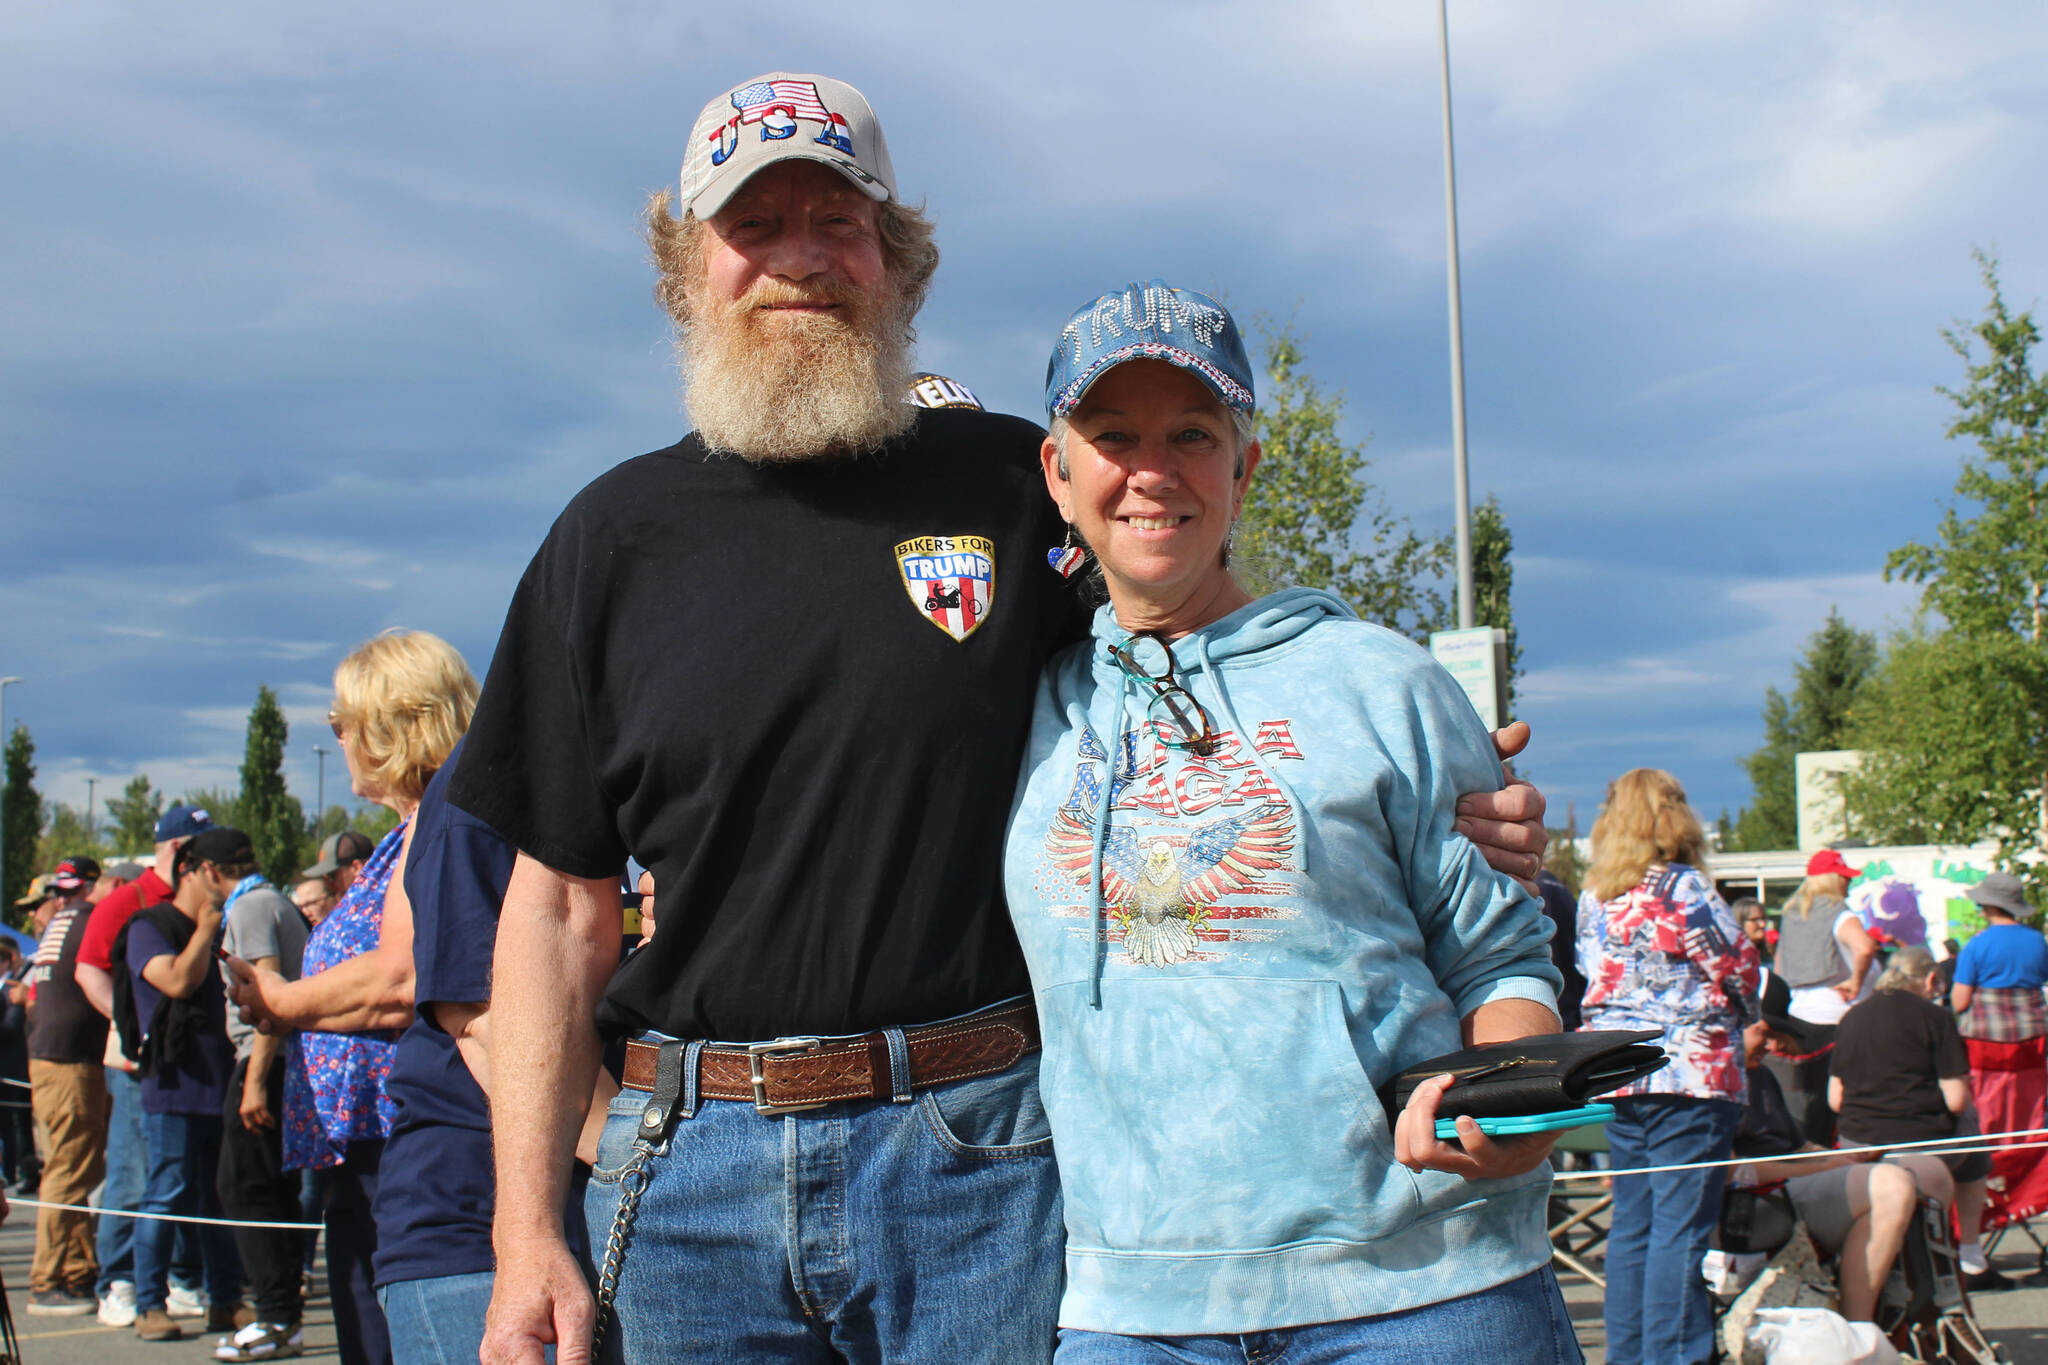 David (left) and April (right) Orth wait to enter the Alaska Airlines Center for a Save America rally on Saturday, July 9, 2022, in Anchorage, Alaska. Former President Donald Trump, U.S. Senate candidate Kelly Tshibaka and U.S. House candidate Sarah Palin were among the events speakers. (Ashlyn O’Hara/Peninsula Clarion)